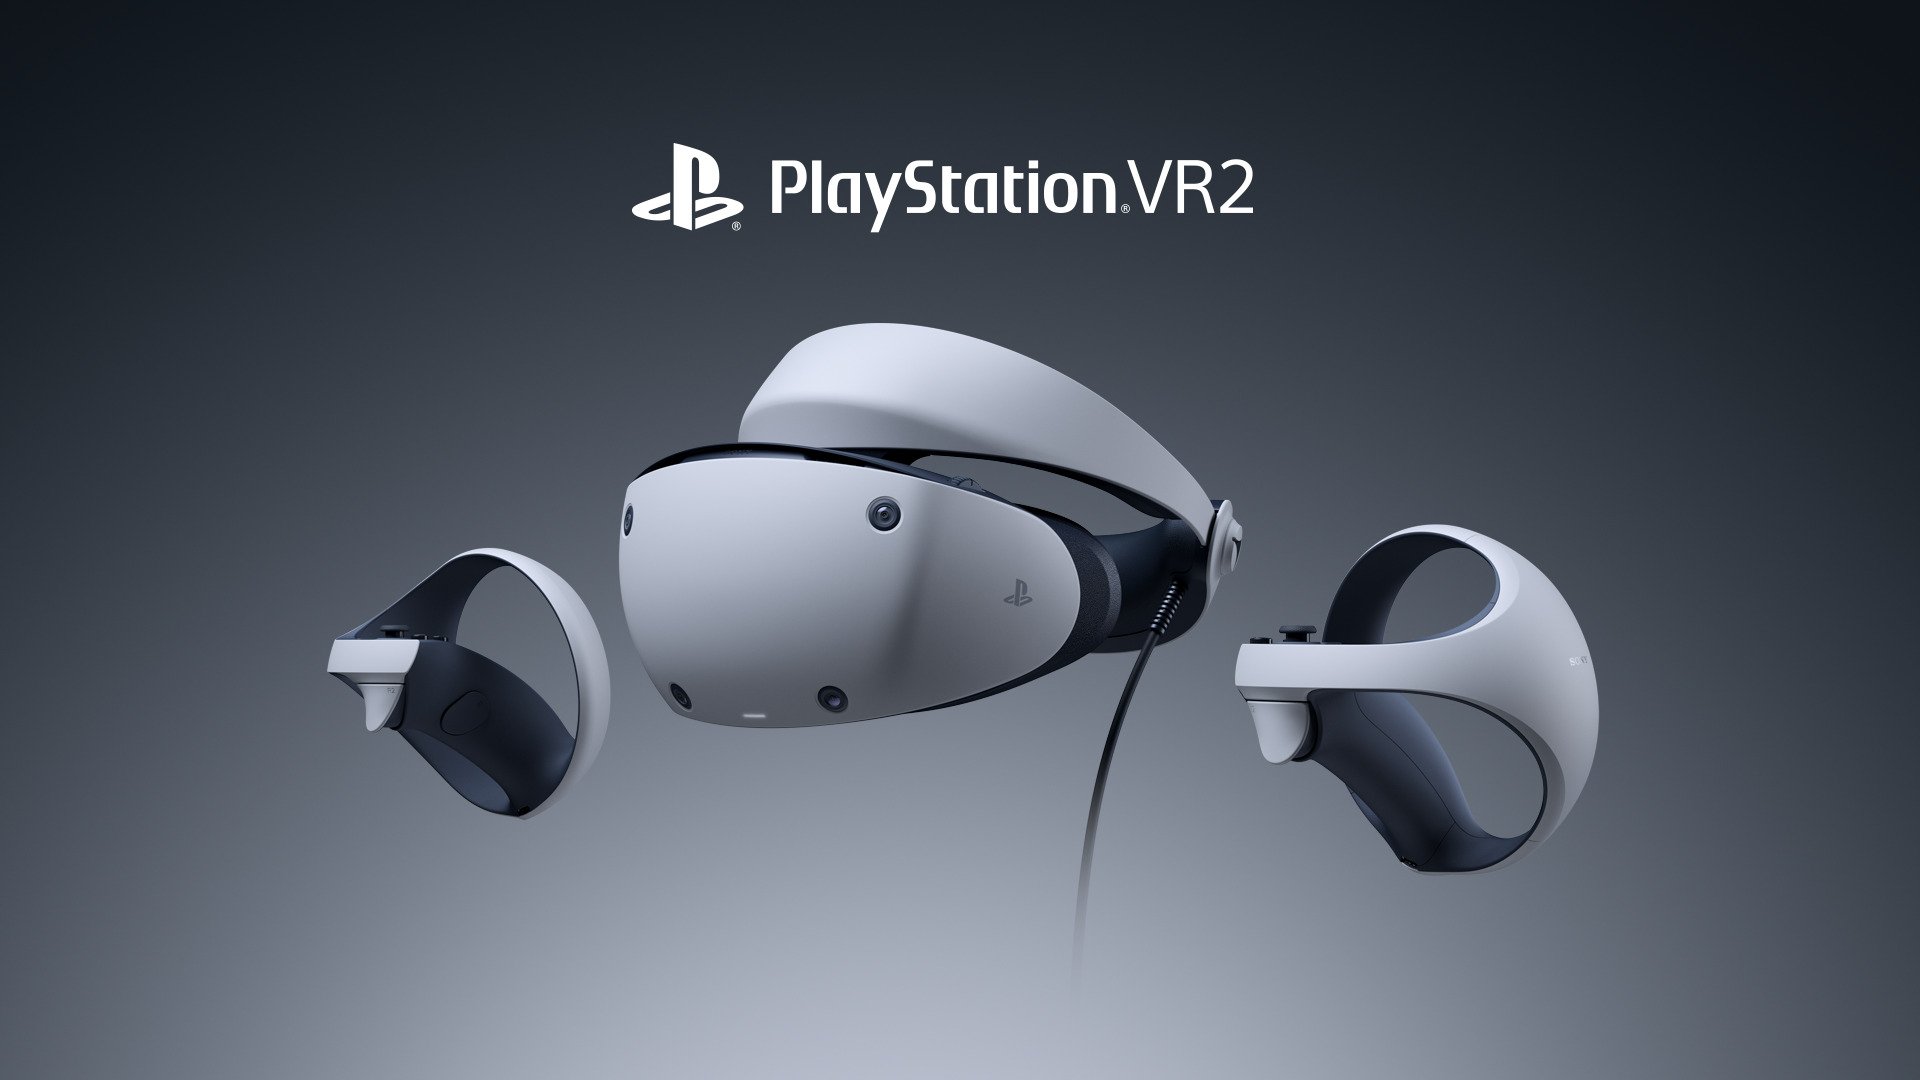 YES. PlayStation VR 2 Working on PC is OFFICIAL. 